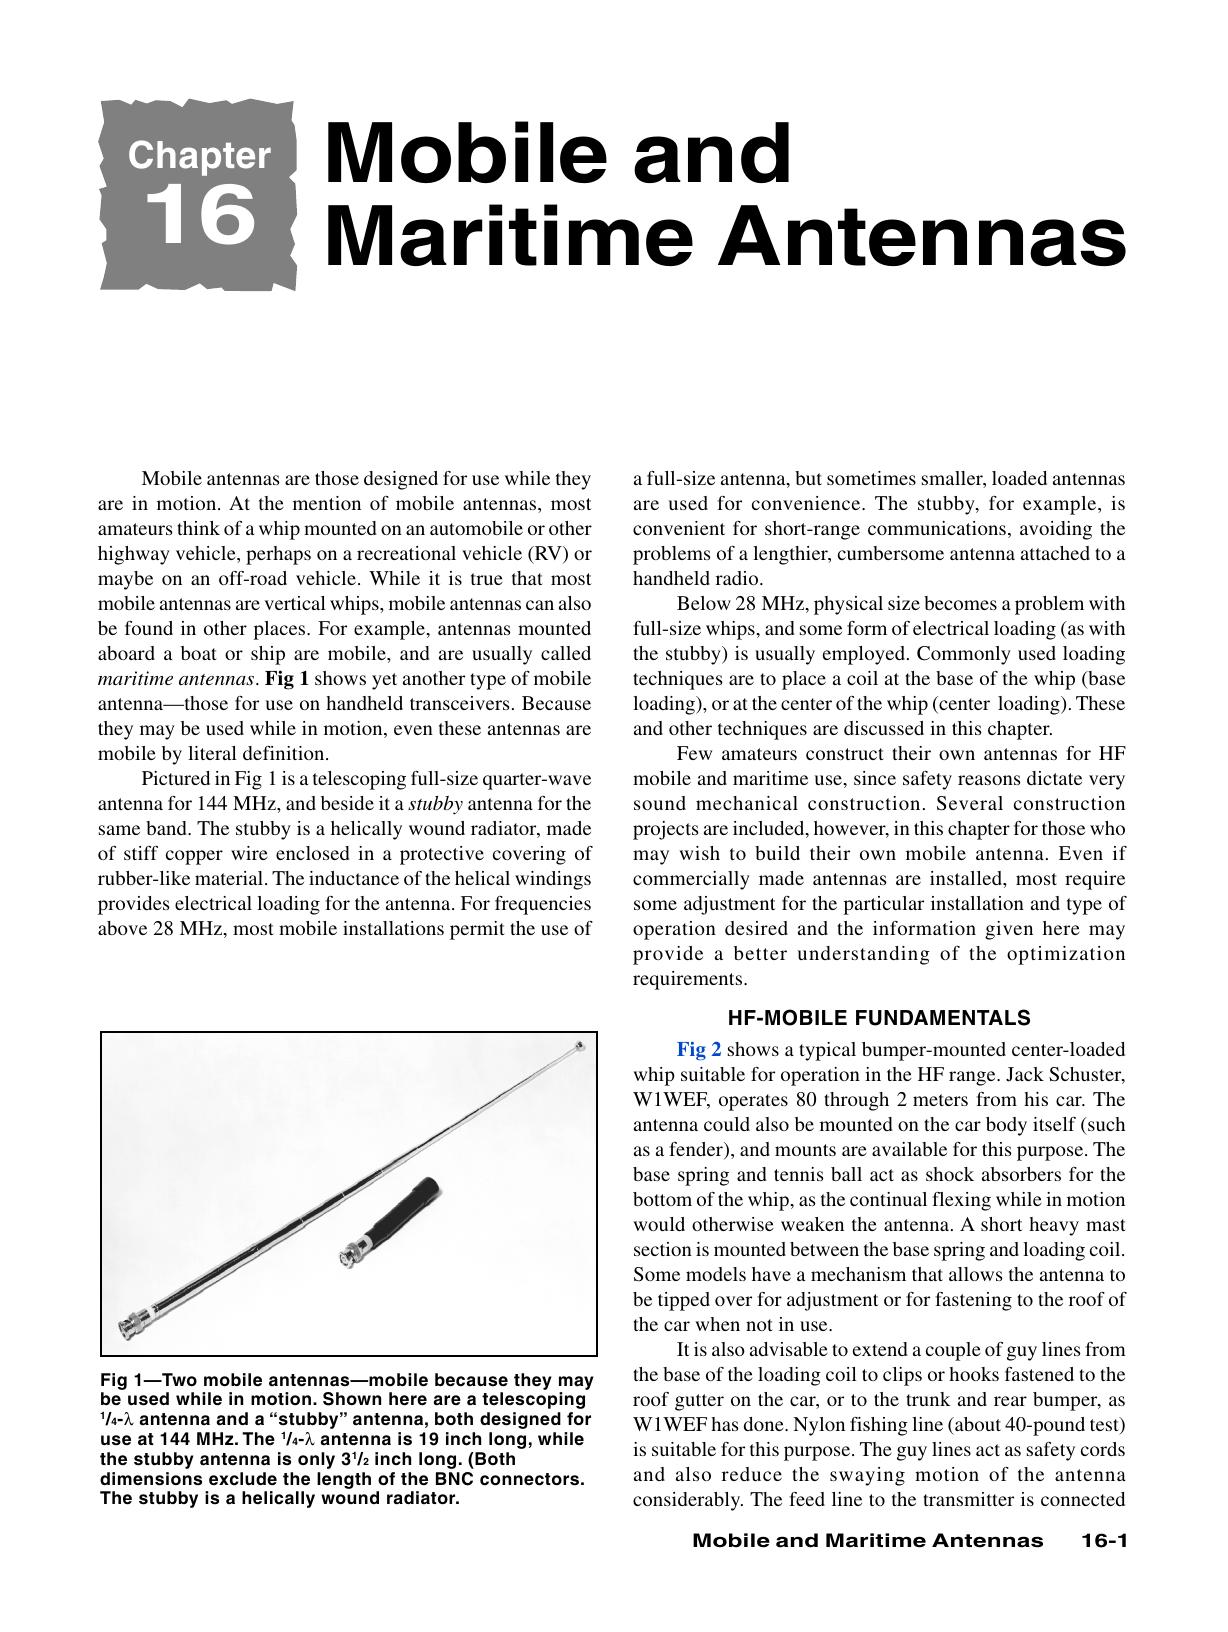 Chapter 16 - Mobile and Maritime Antennas by ARRL